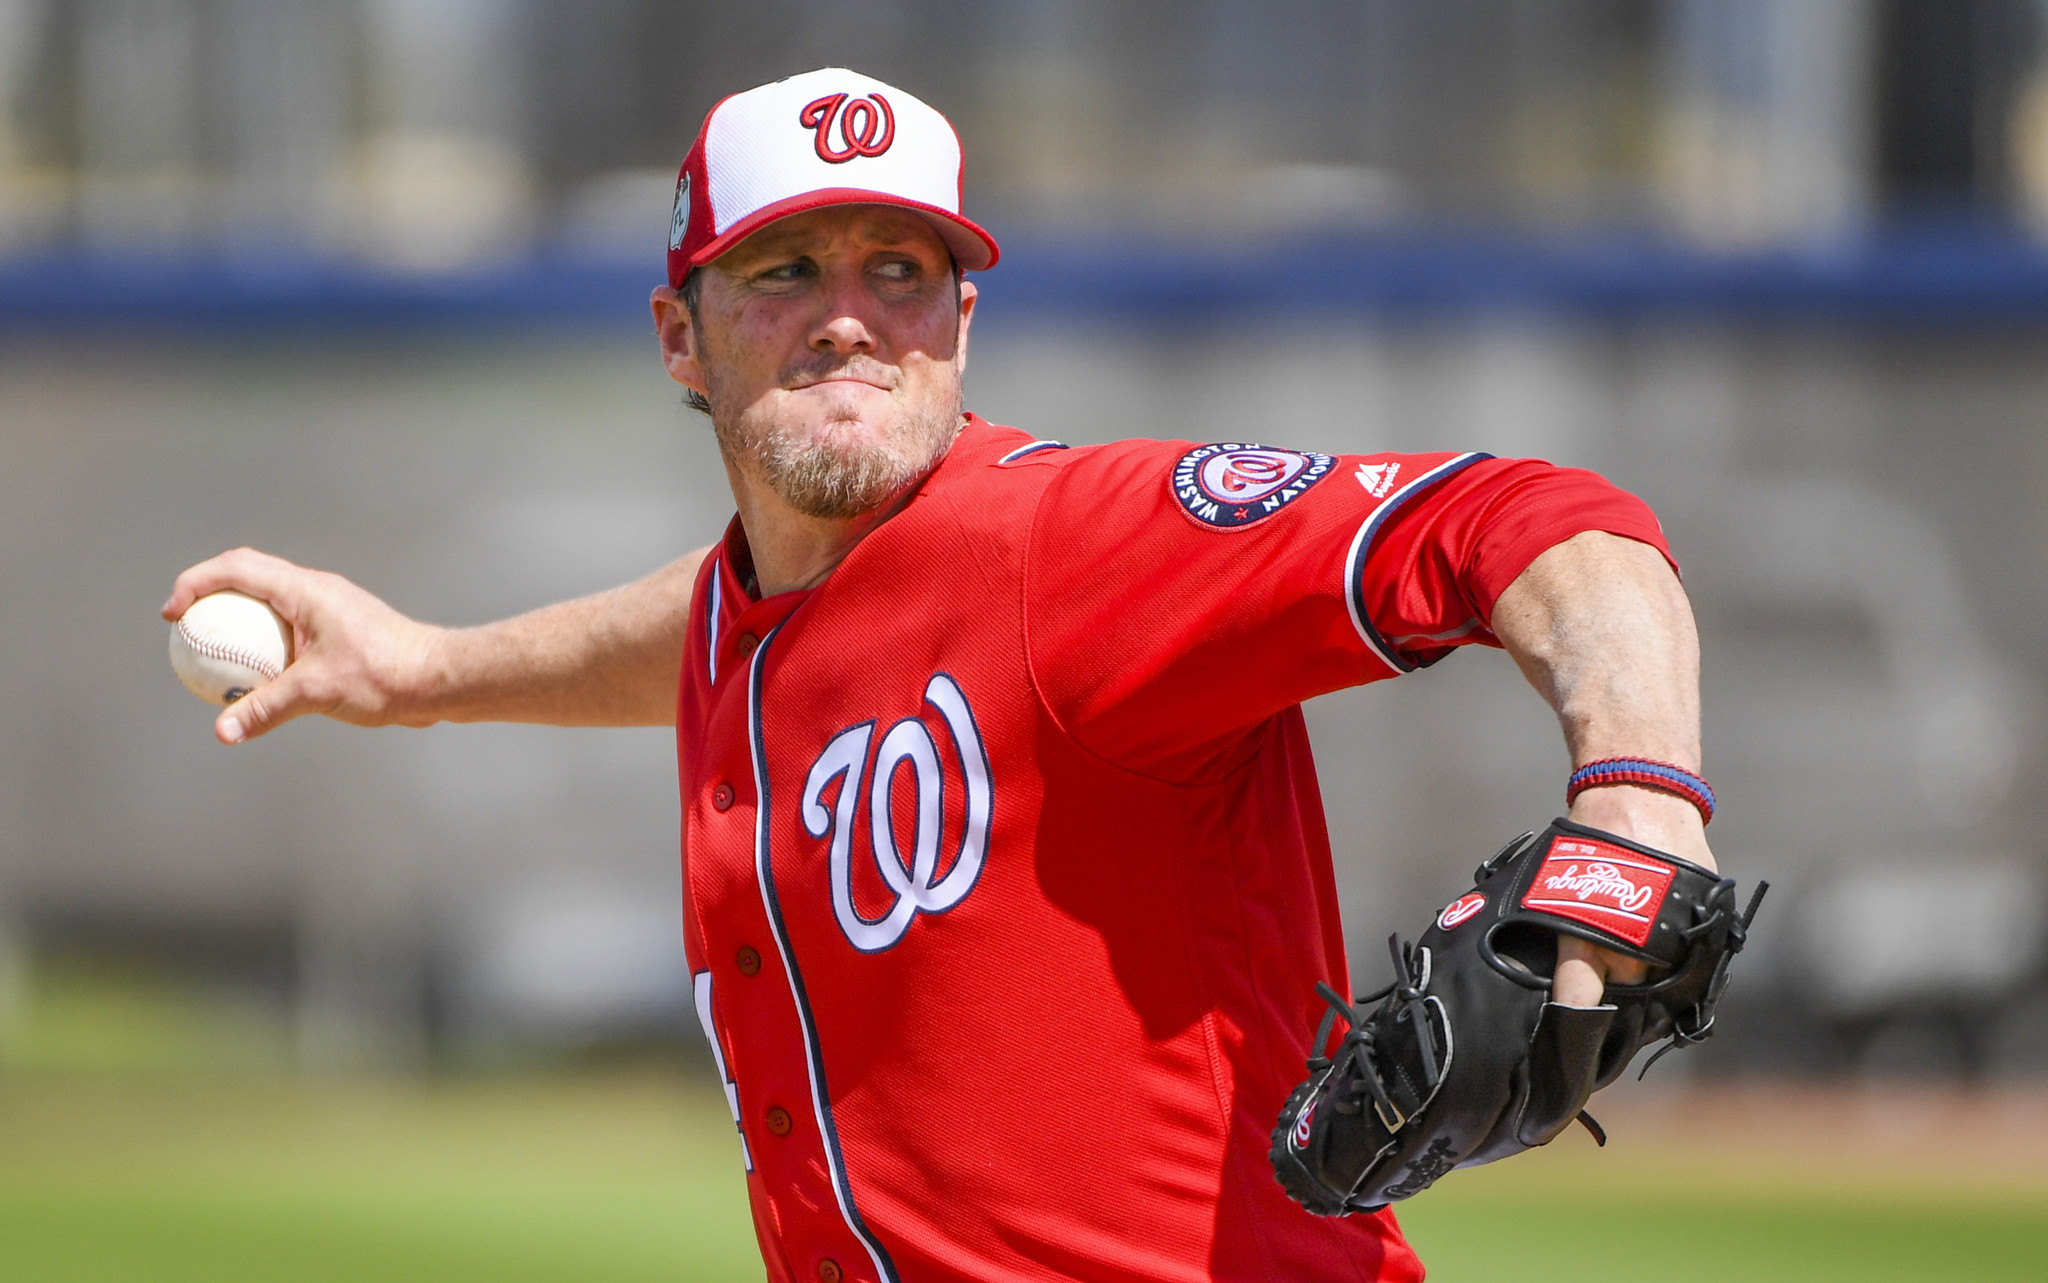 Nationals aren't counting on Joe Nathan to be elite again at 42, but they're intrigued ...2048 x 1283